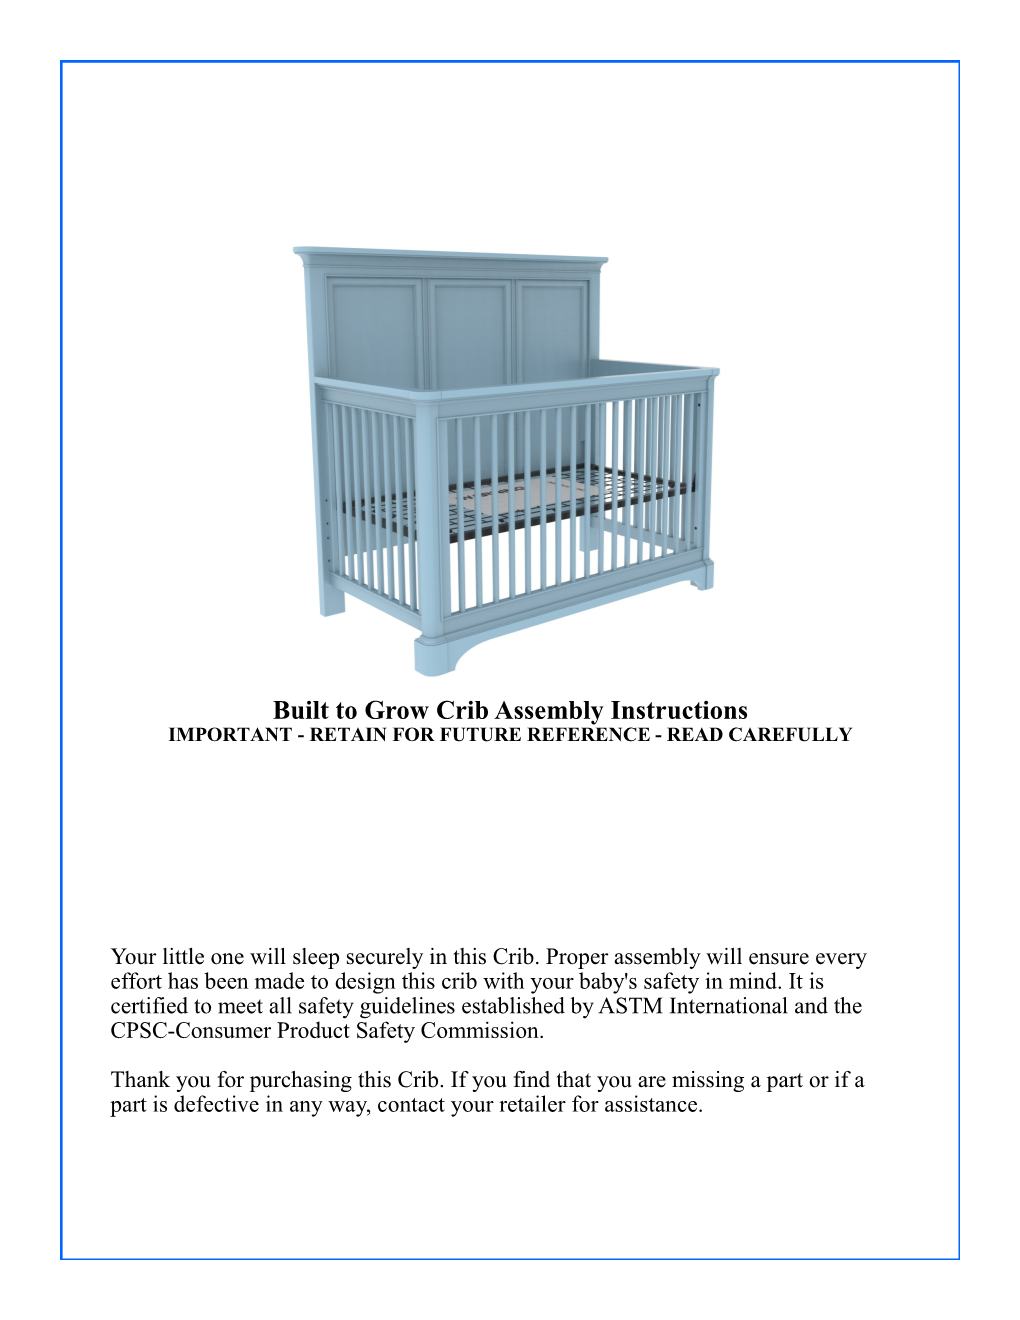 Built to Grow Crib Assembly Instructions IMPORTANT - RETAIN for FUTURE REFERENCE - READ CAREFULLY